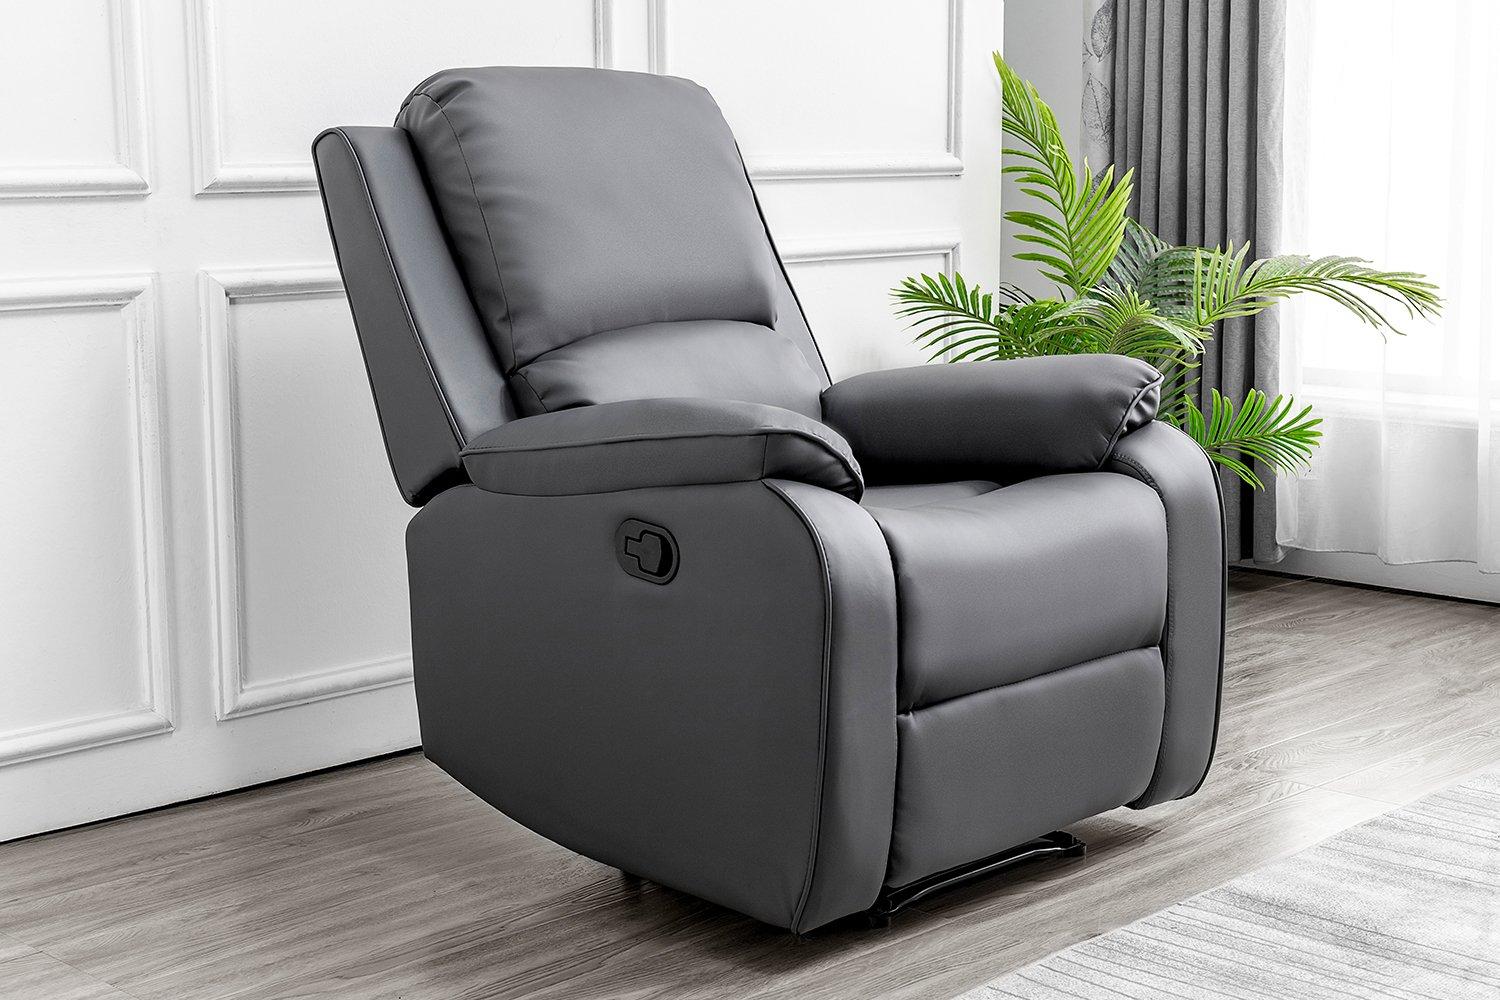 Palermo Leather Manual Recliner Armchair